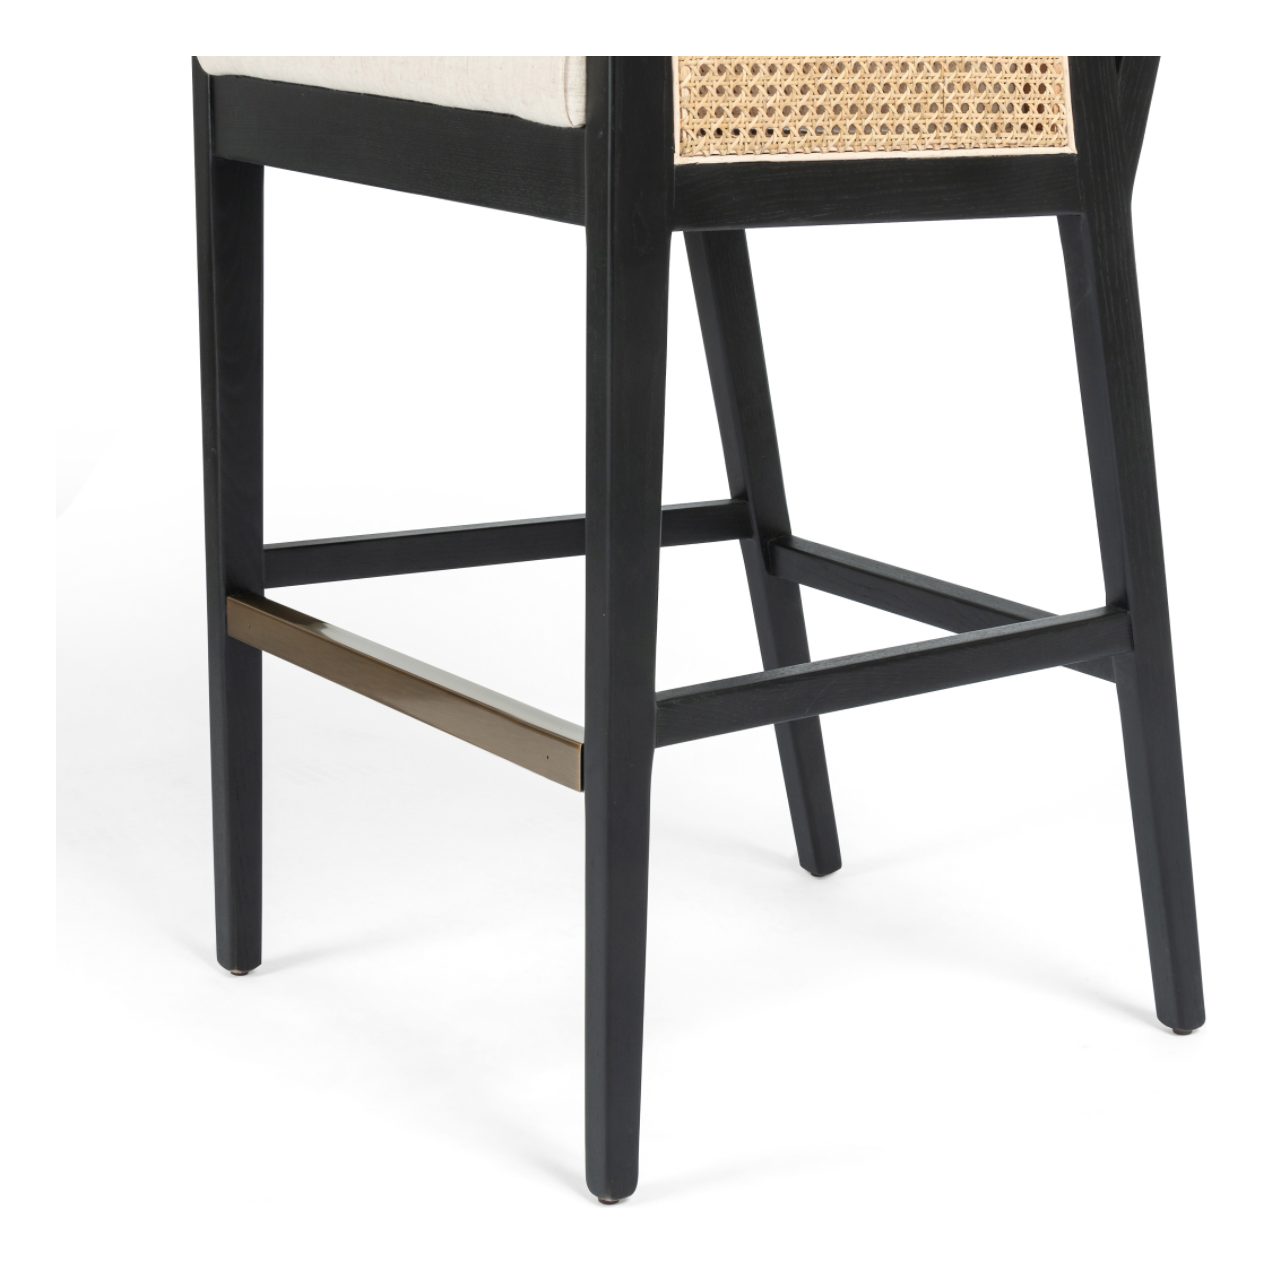 We love the retro look the cane brings to this Antonia Ebony Cane Bar + Counter Stool. A stunning piece to complete a retro aesthetic in any kitchen or bar area. 